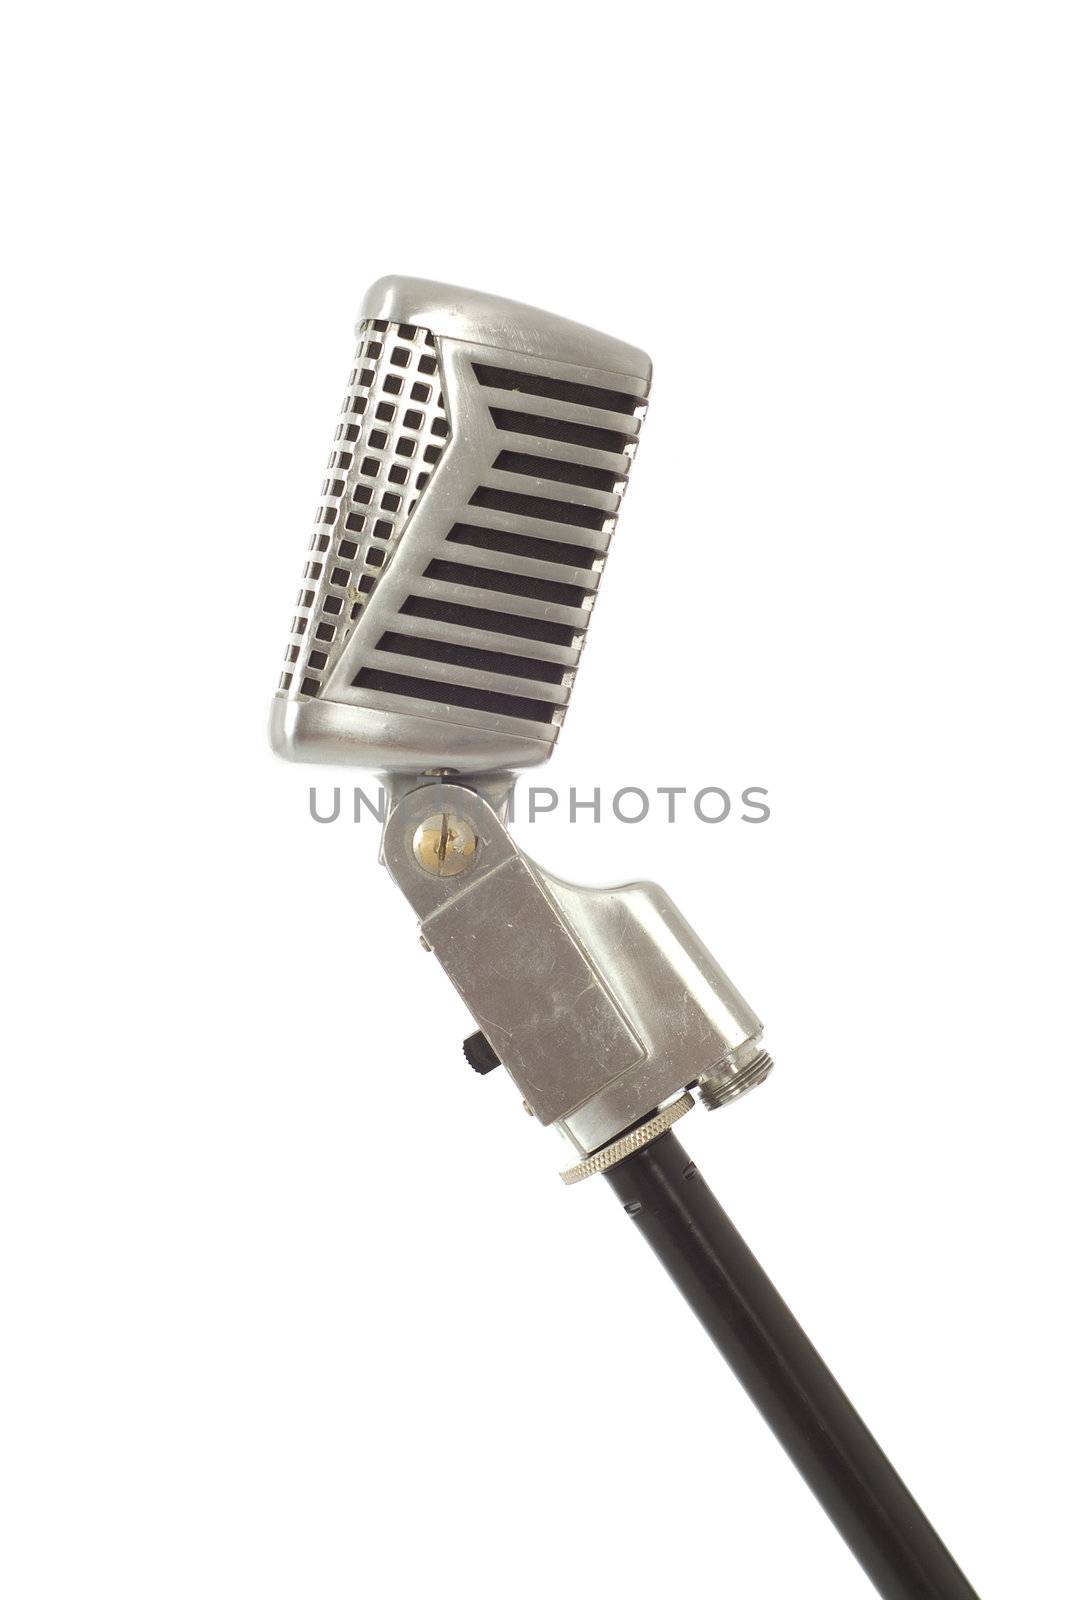 Vintage recording, announcing or singing microphone isolated on white